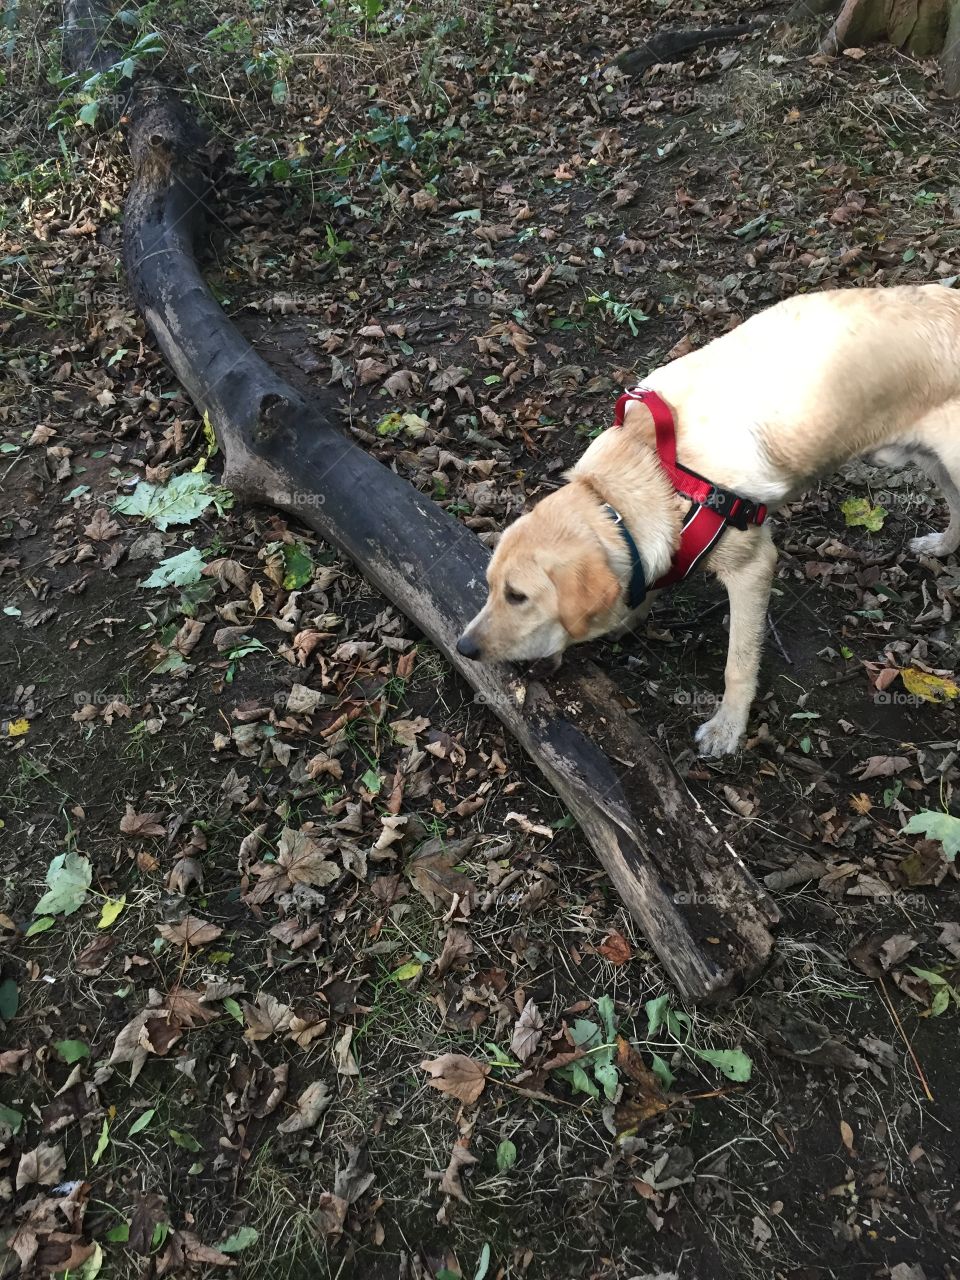 Dog not phased by the size of log